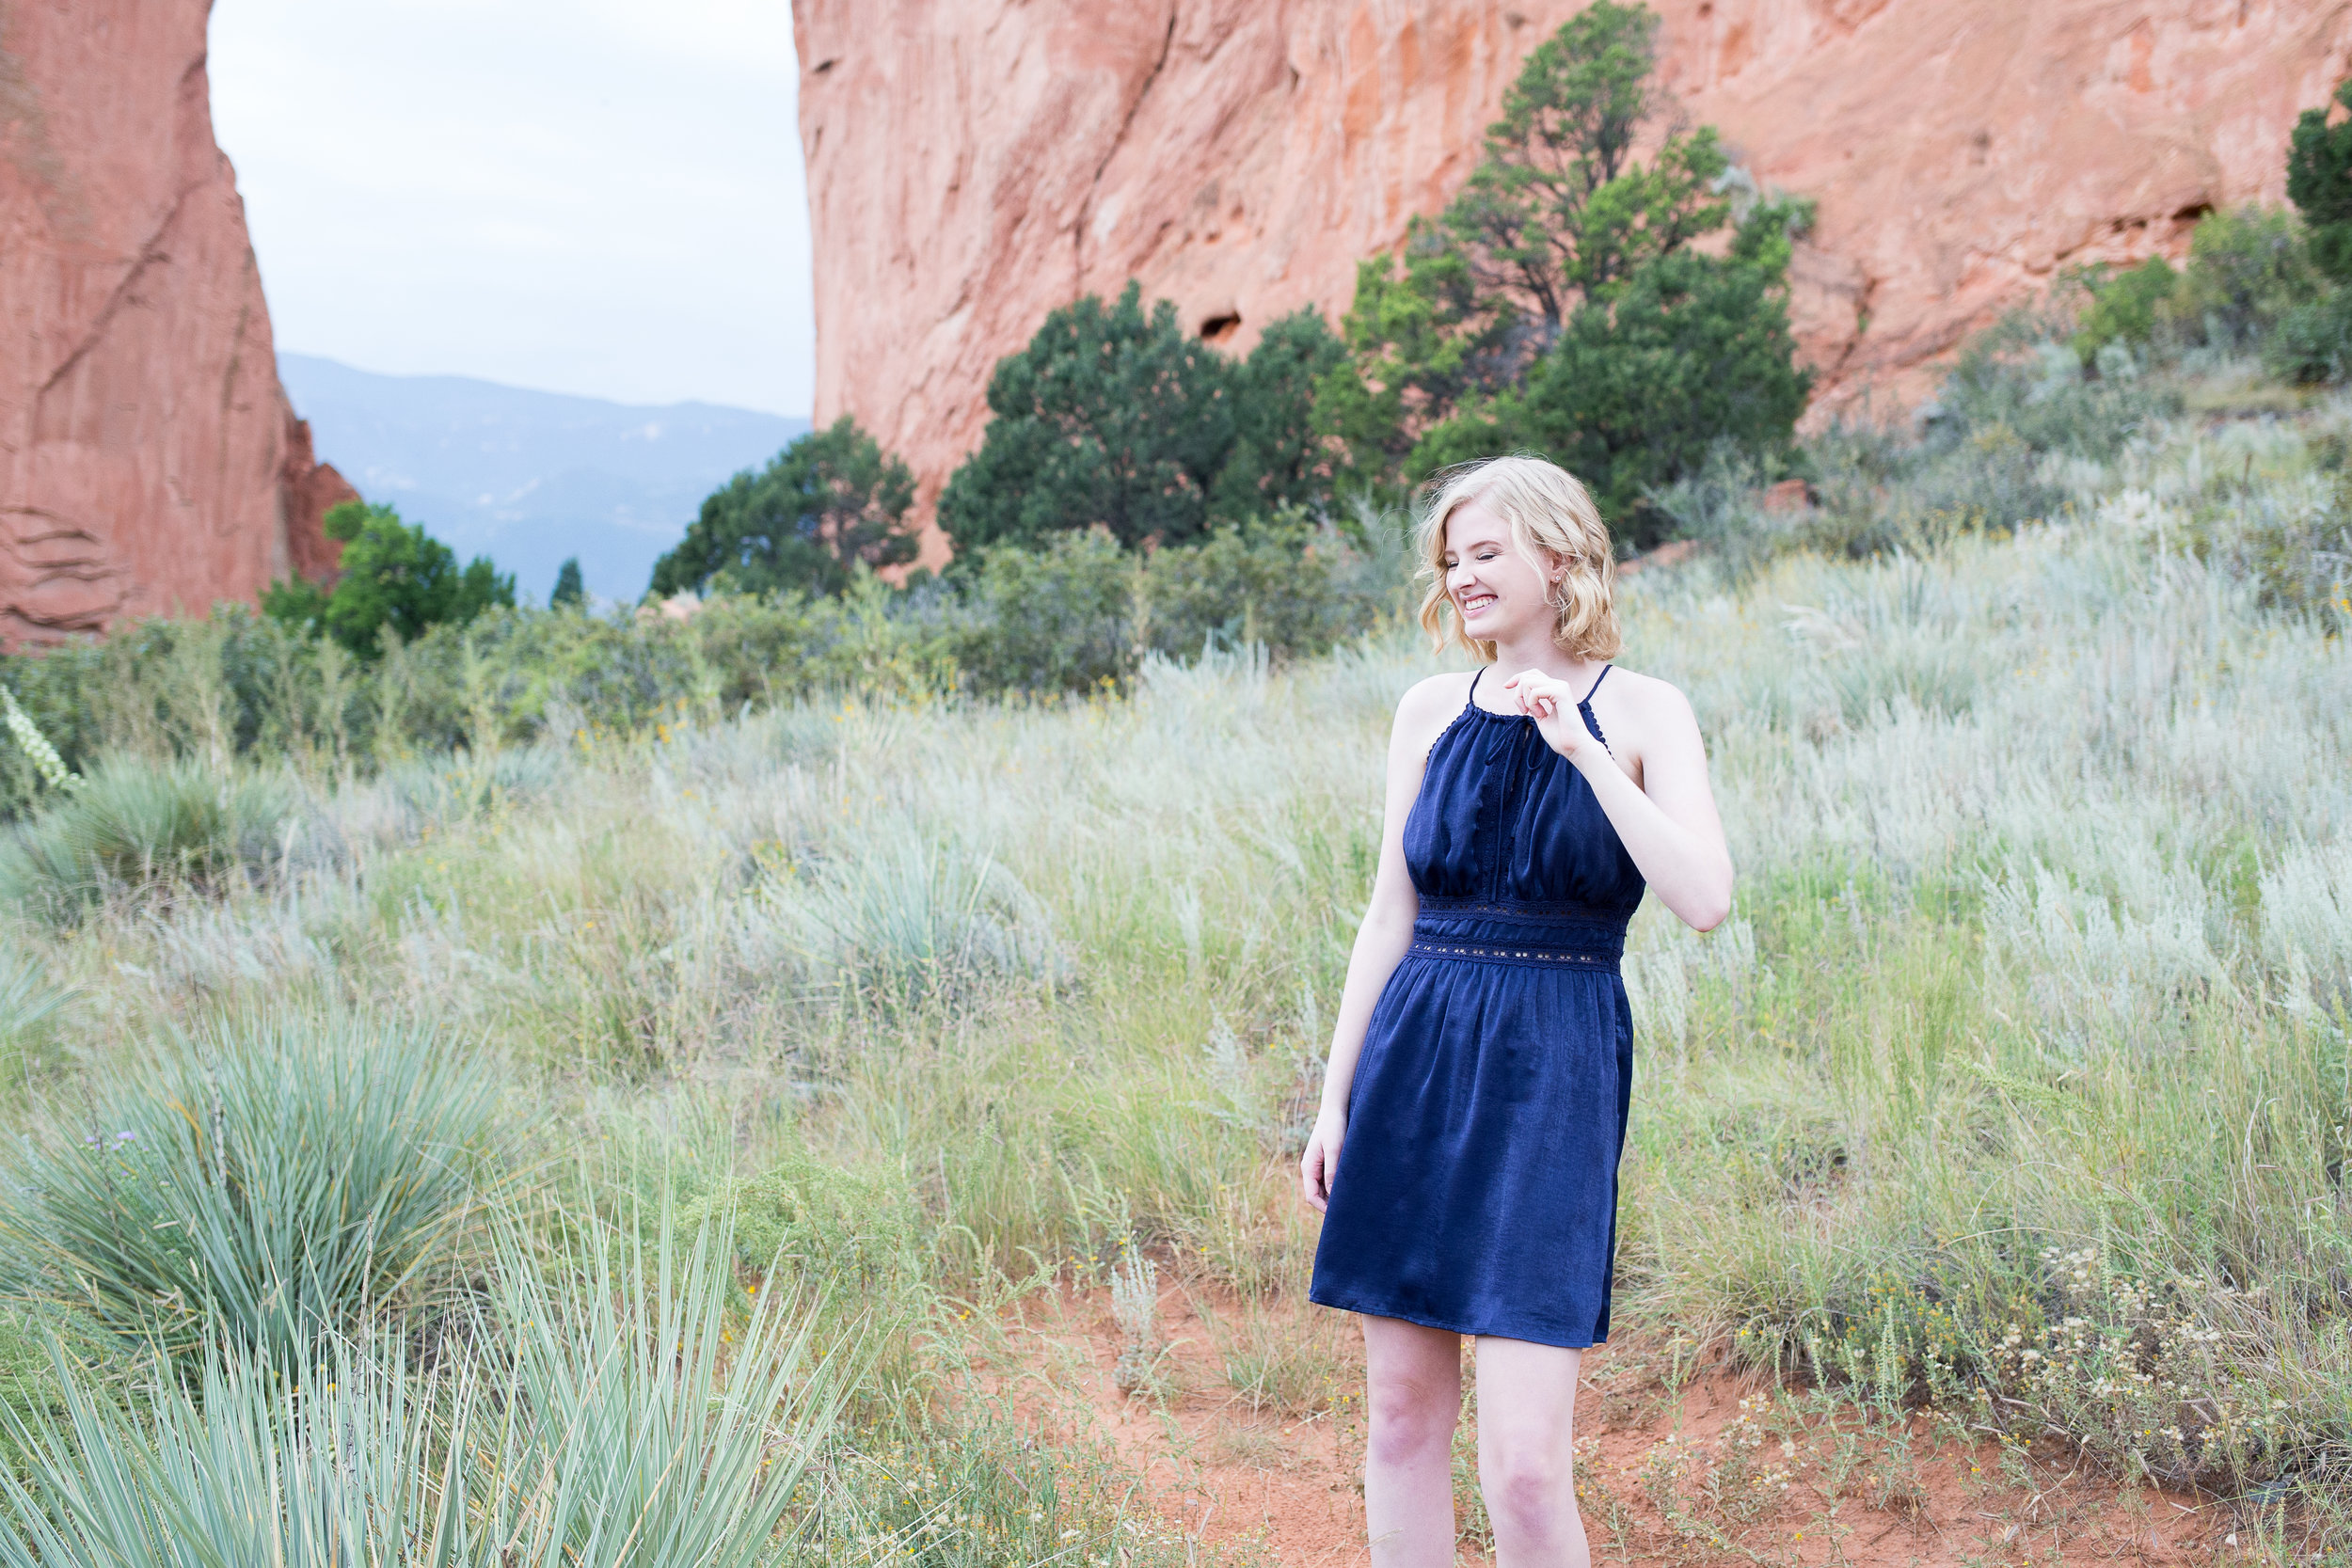 Girl laughing and looking in the distance with Garden of the Gods in the background for her senior photo shoot, Stacy Carosa Photography, Colorado Springs